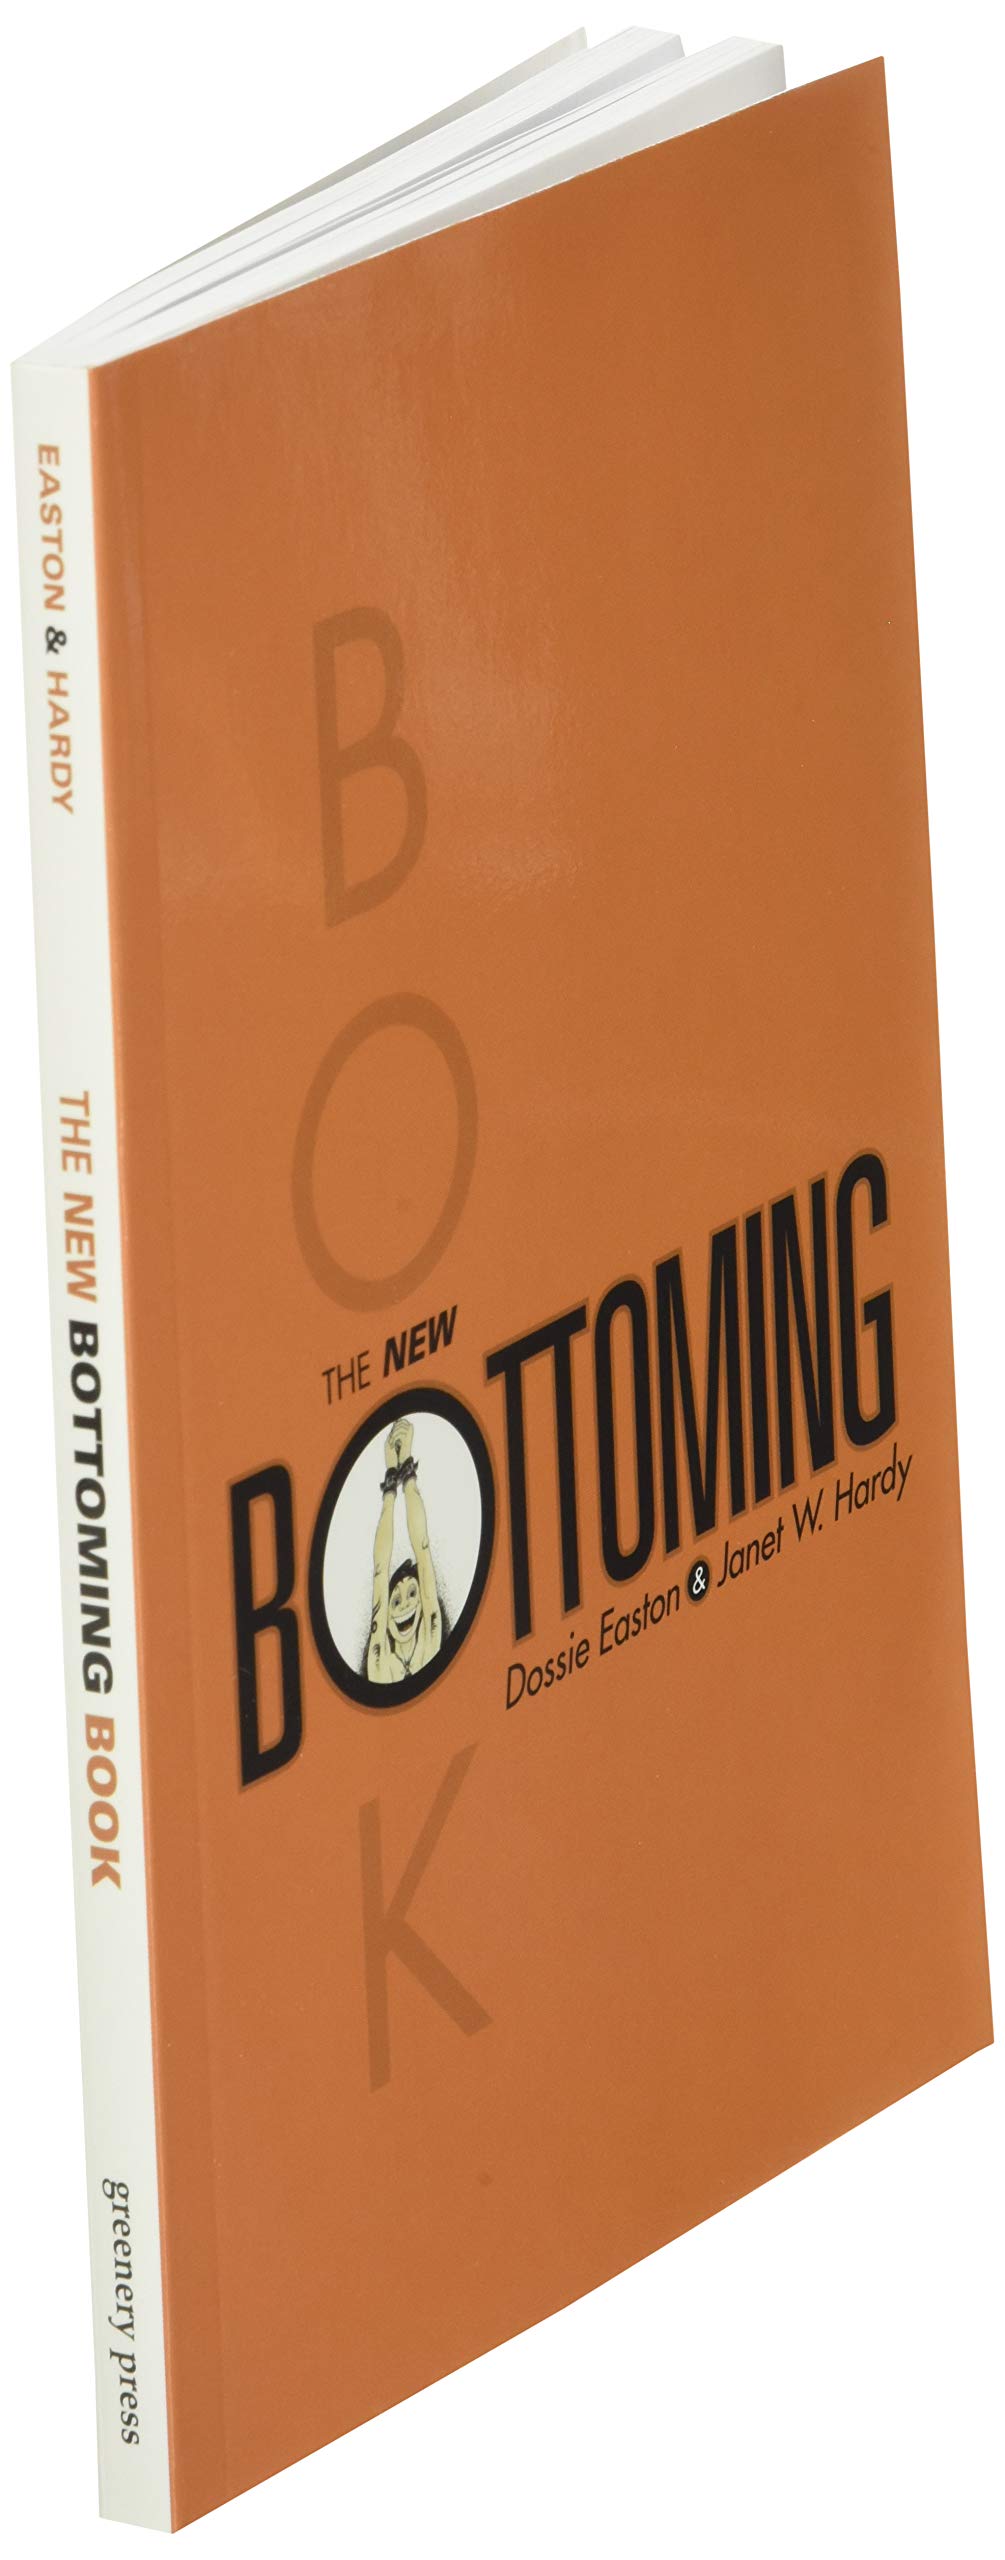 An angle that shows the thickness of The New Bottoming Book - Dossie Easton & Janet W. Hardy.